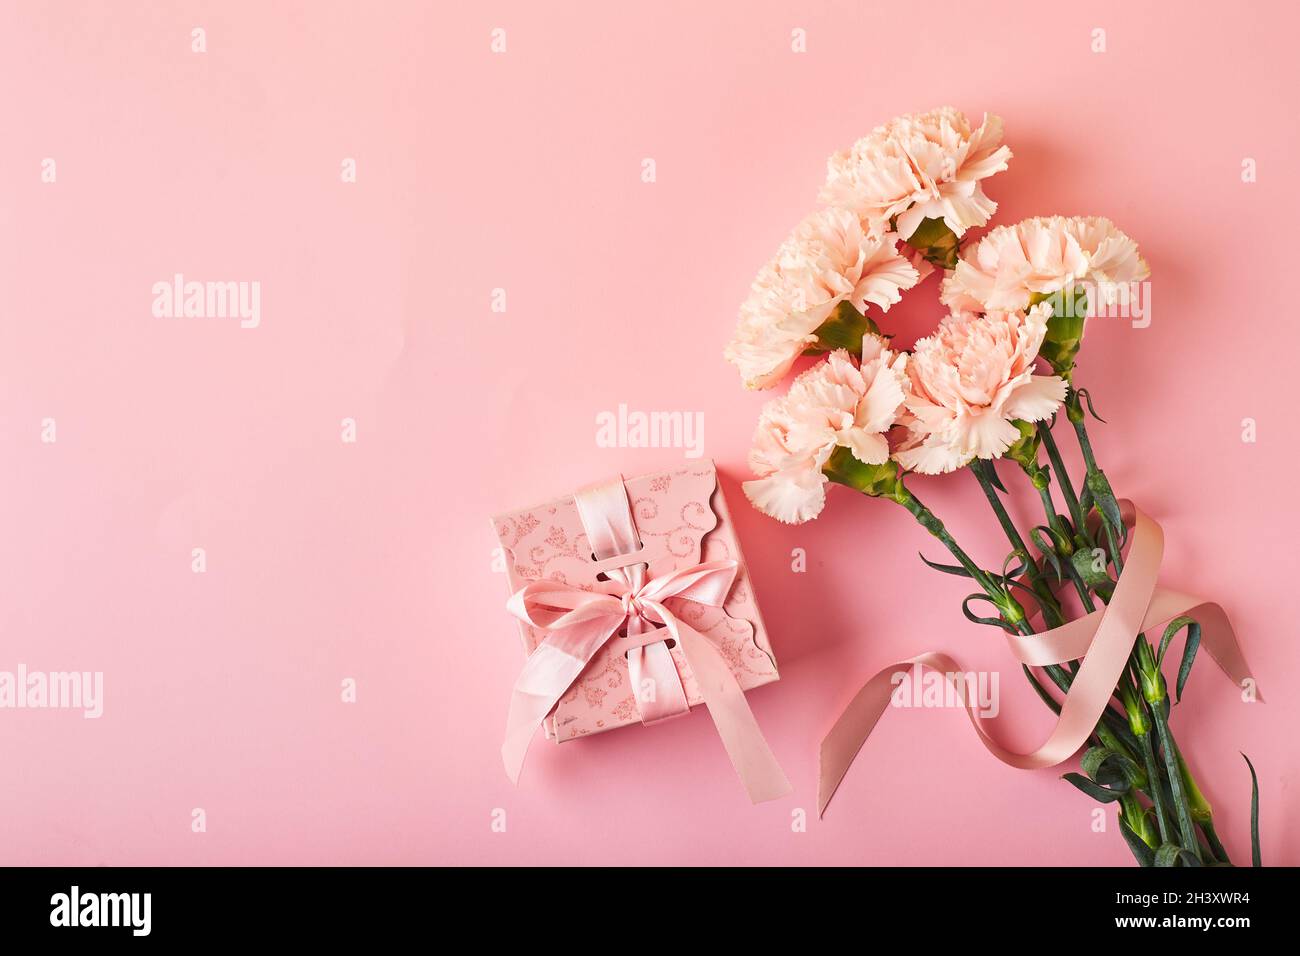 Bouquet of pink carnations and pink gift box. Design concept of holiday greeting with carnation bouquet on pink background Stock Photo